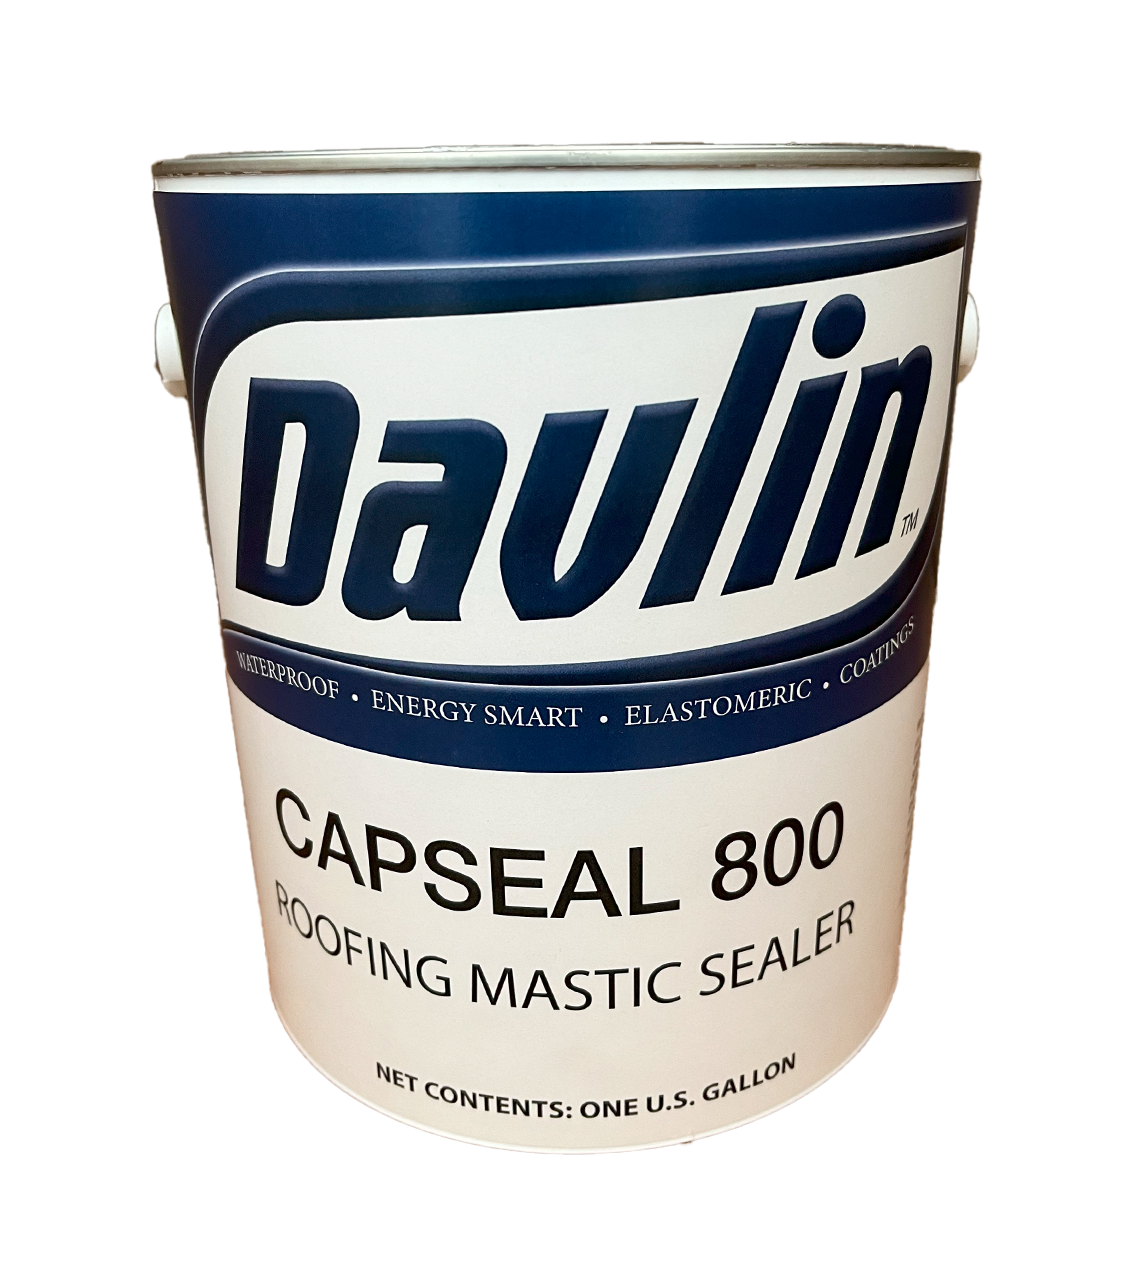 Capseal 800 - Roof Mastic Sealant - 1 Gal - Free Shipping - Free Sample